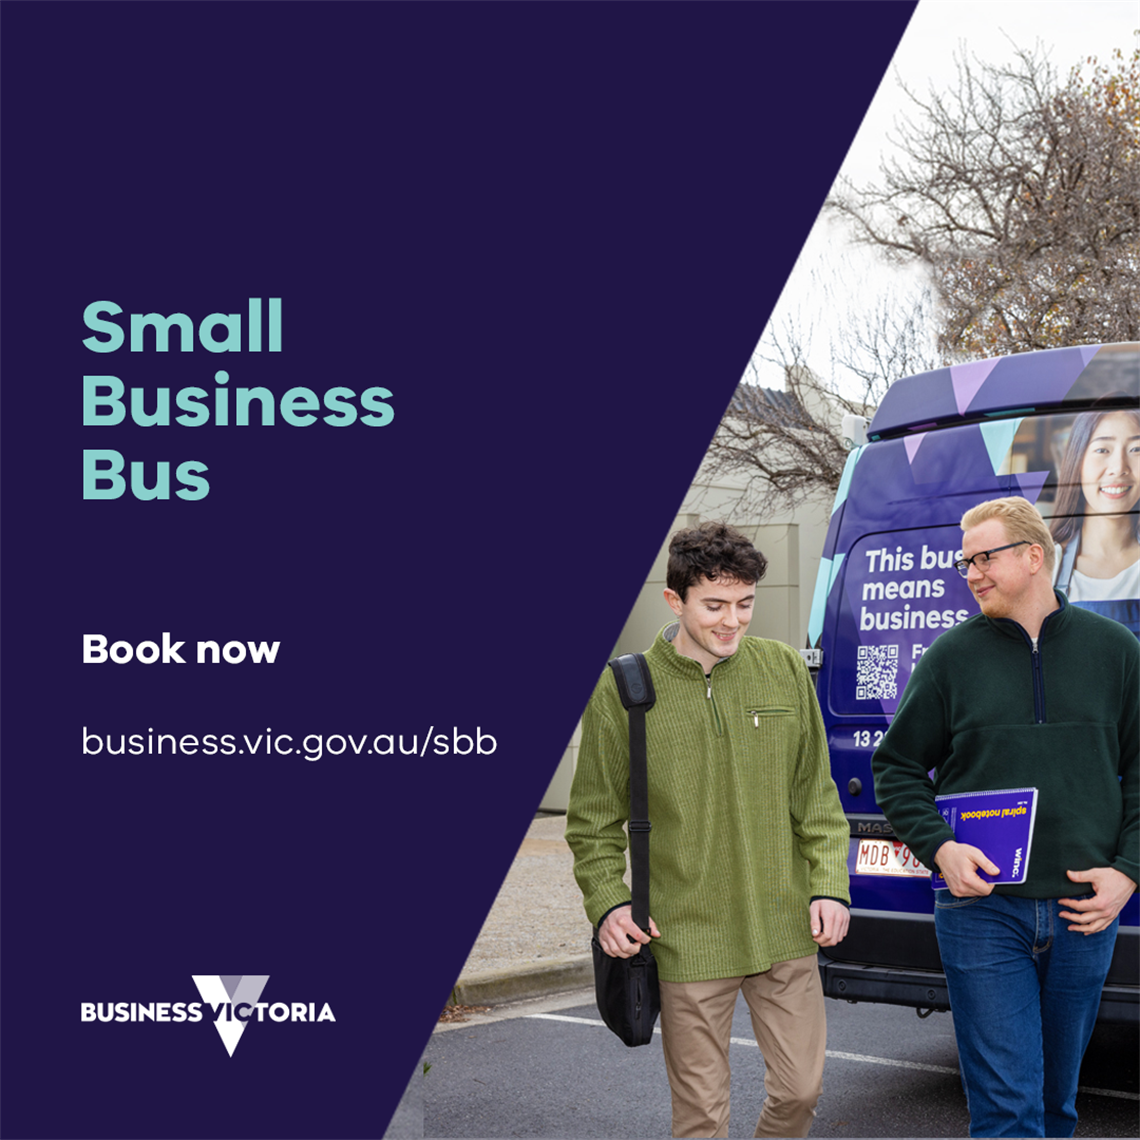 07.1_13289_Business-Victoria_Instagram_Feed-Organic_1080x1080-Small-Business-Bus---For-external-use.png